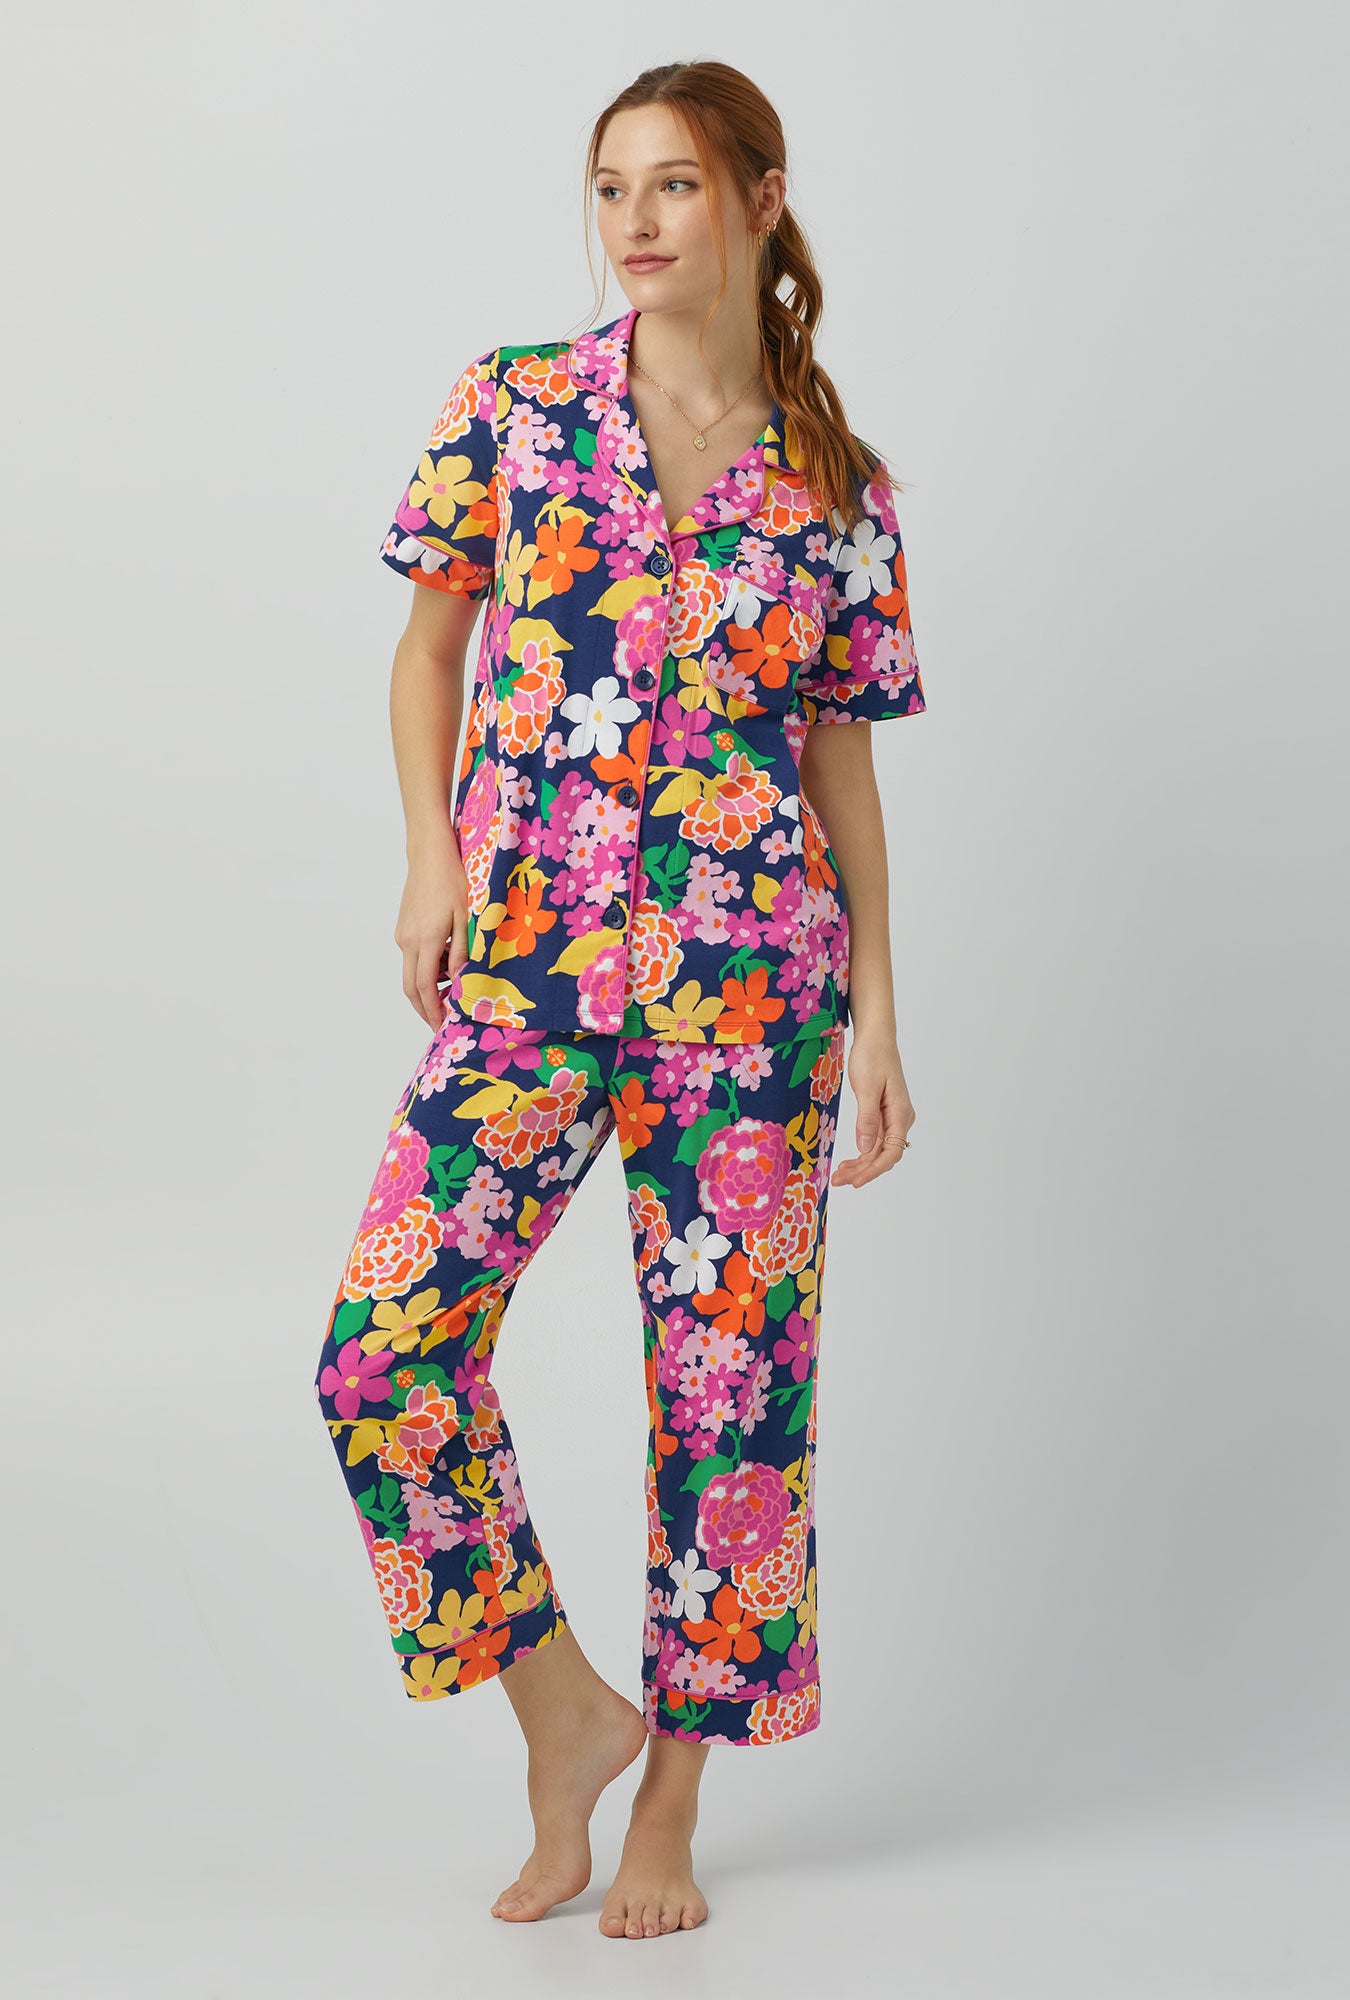 A lady wearing Short Sleeve Classic Stretch Jersey Cropped PJ Set with greenhouse floral print